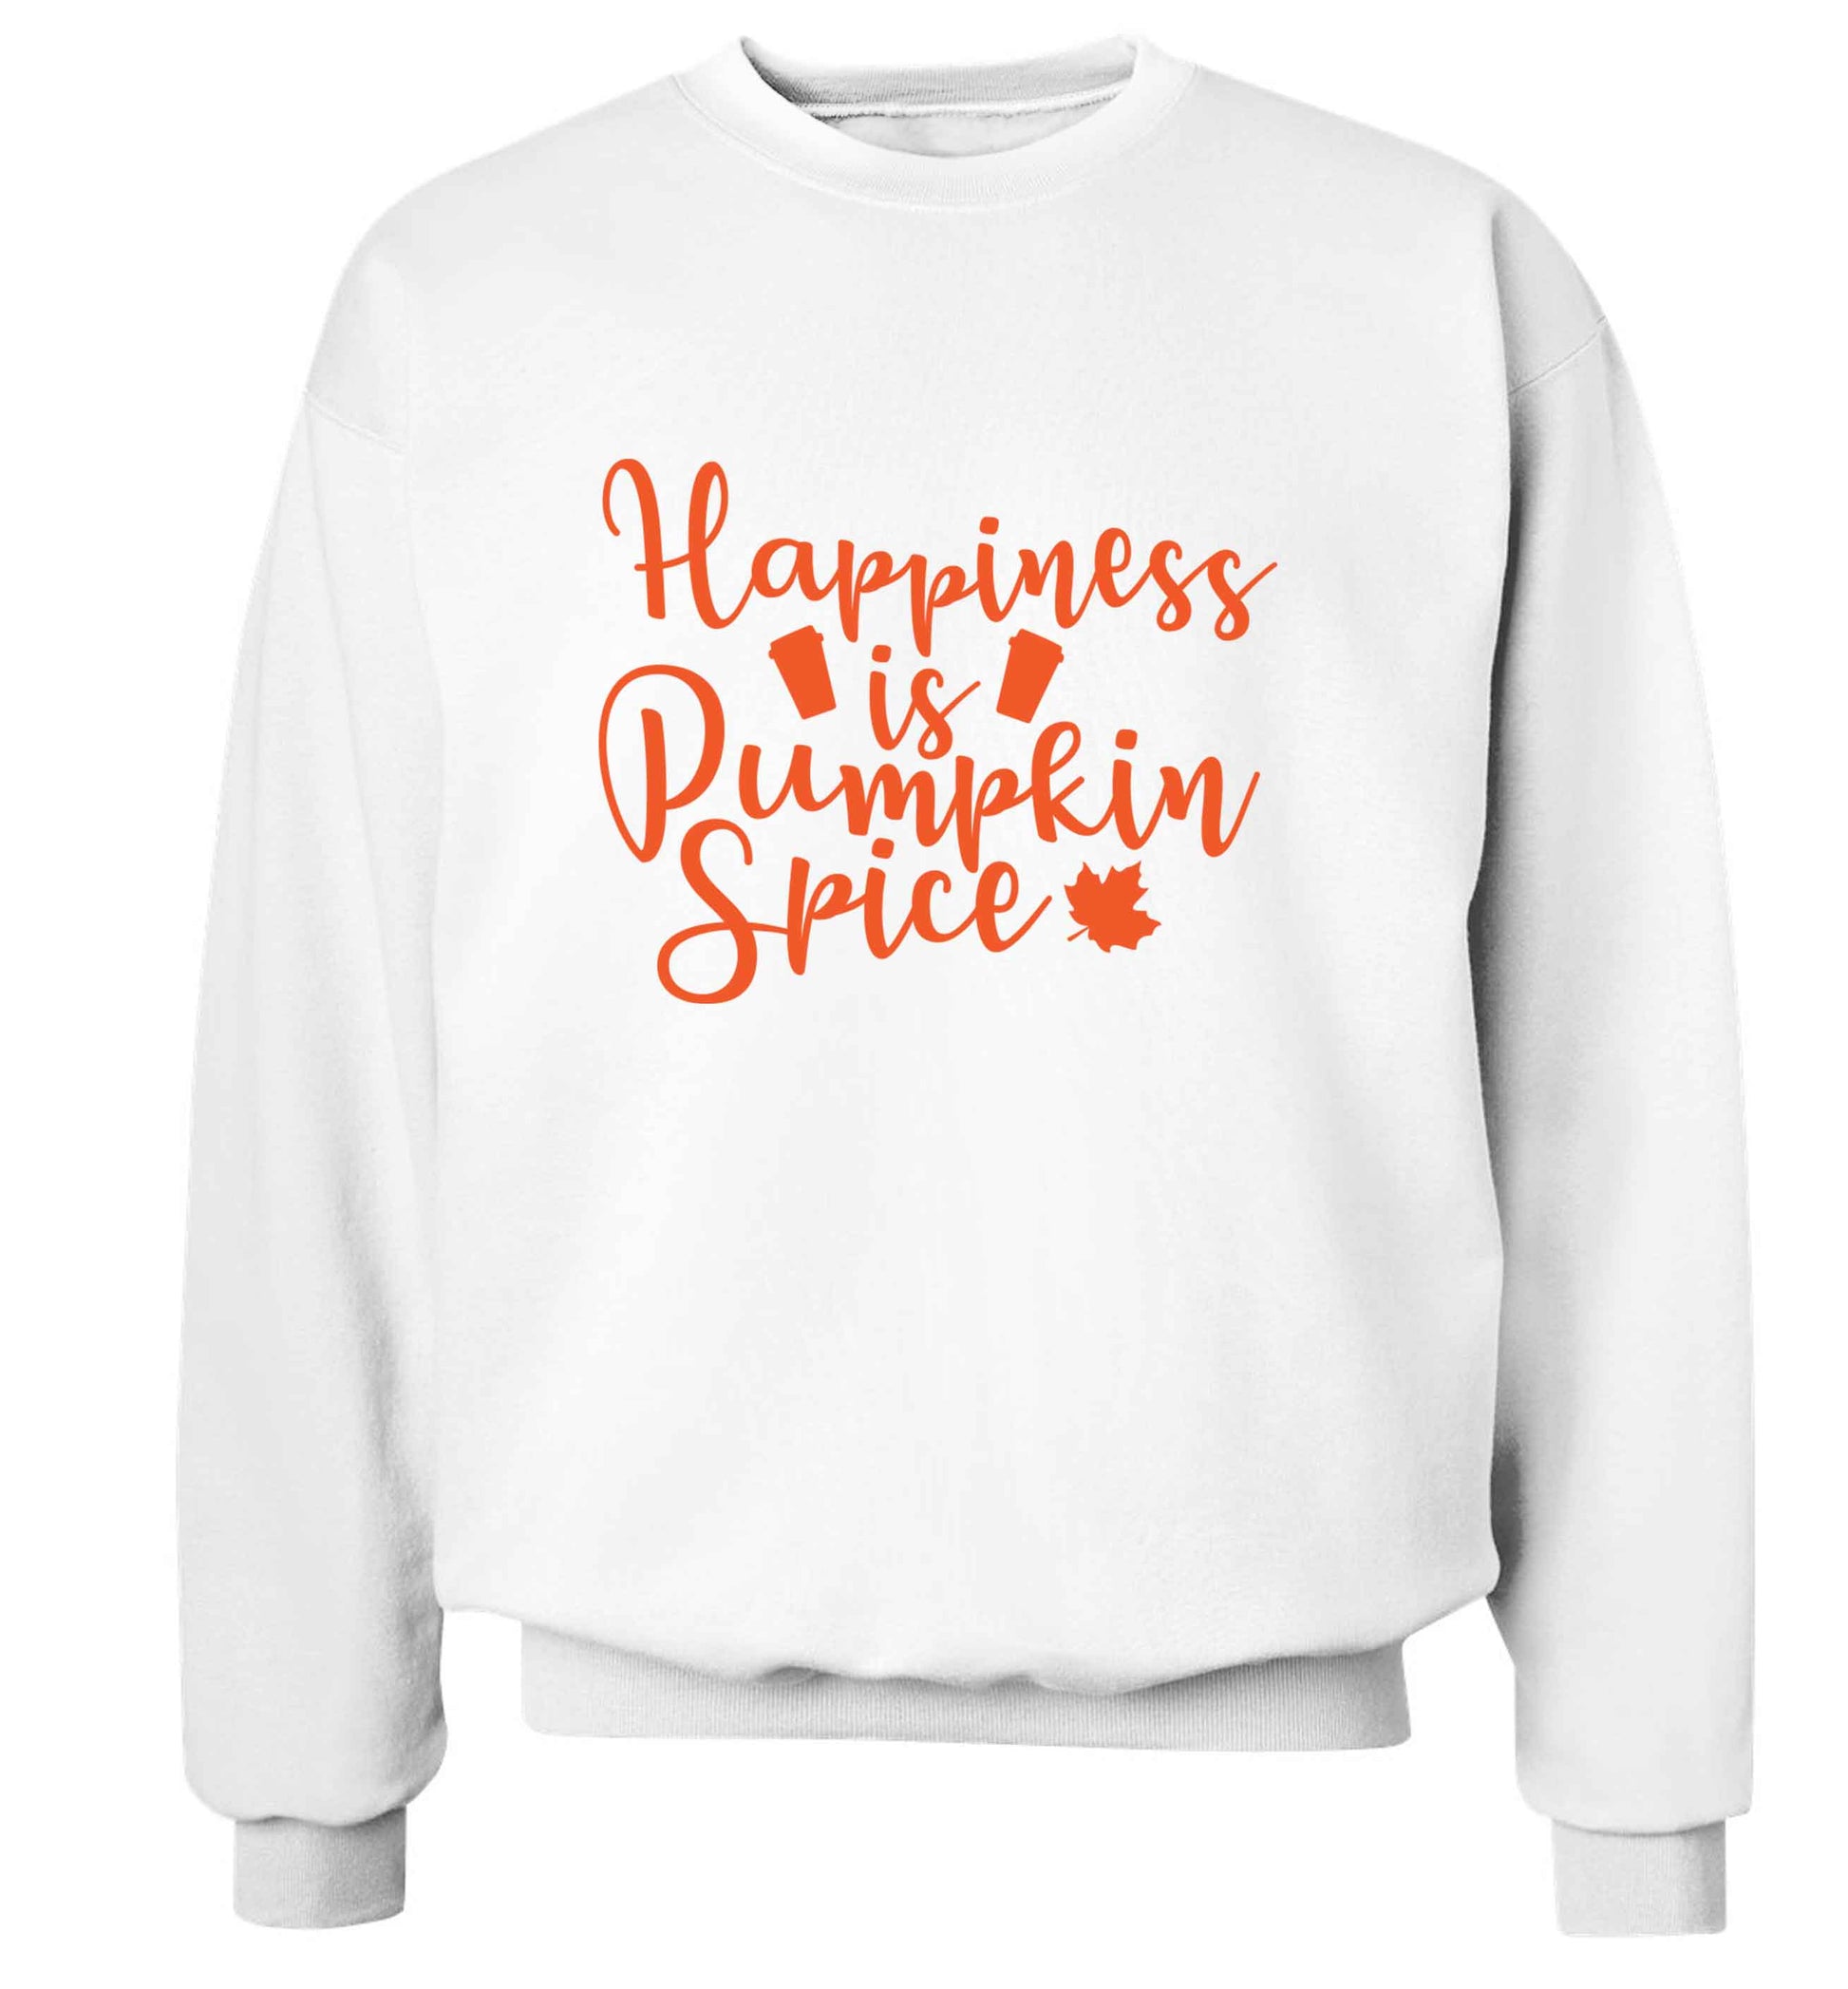 Happiness Pumpkin Spice adult's unisex white sweater 2XL